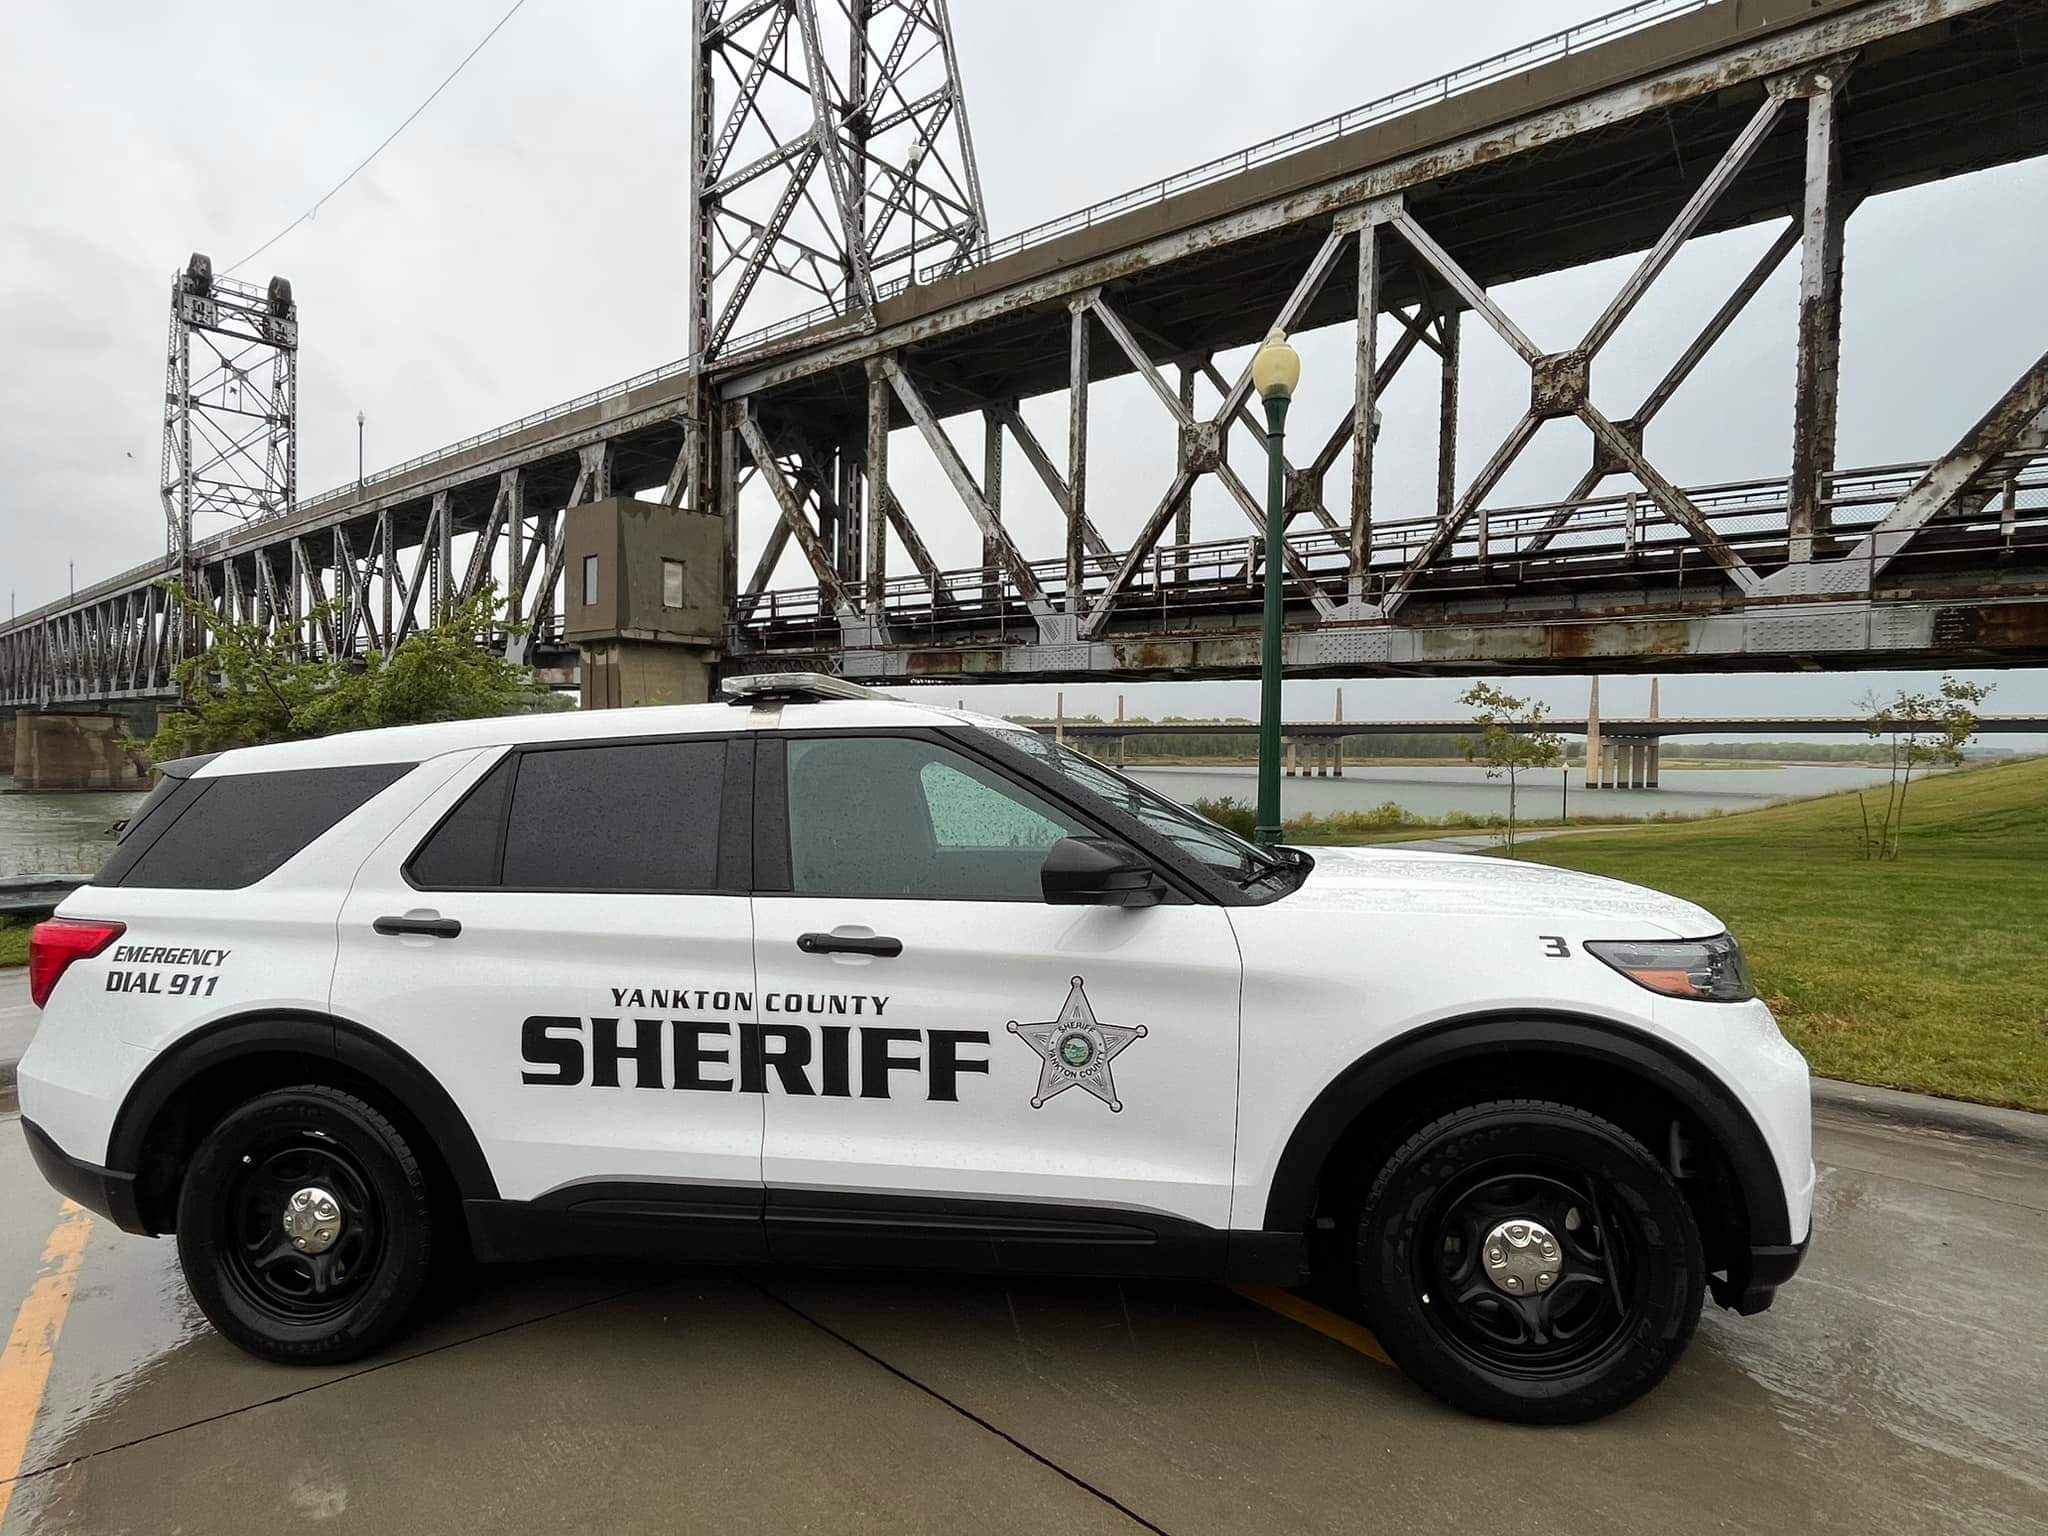 Yankton County Sheriff’s Department is Getting a New Look